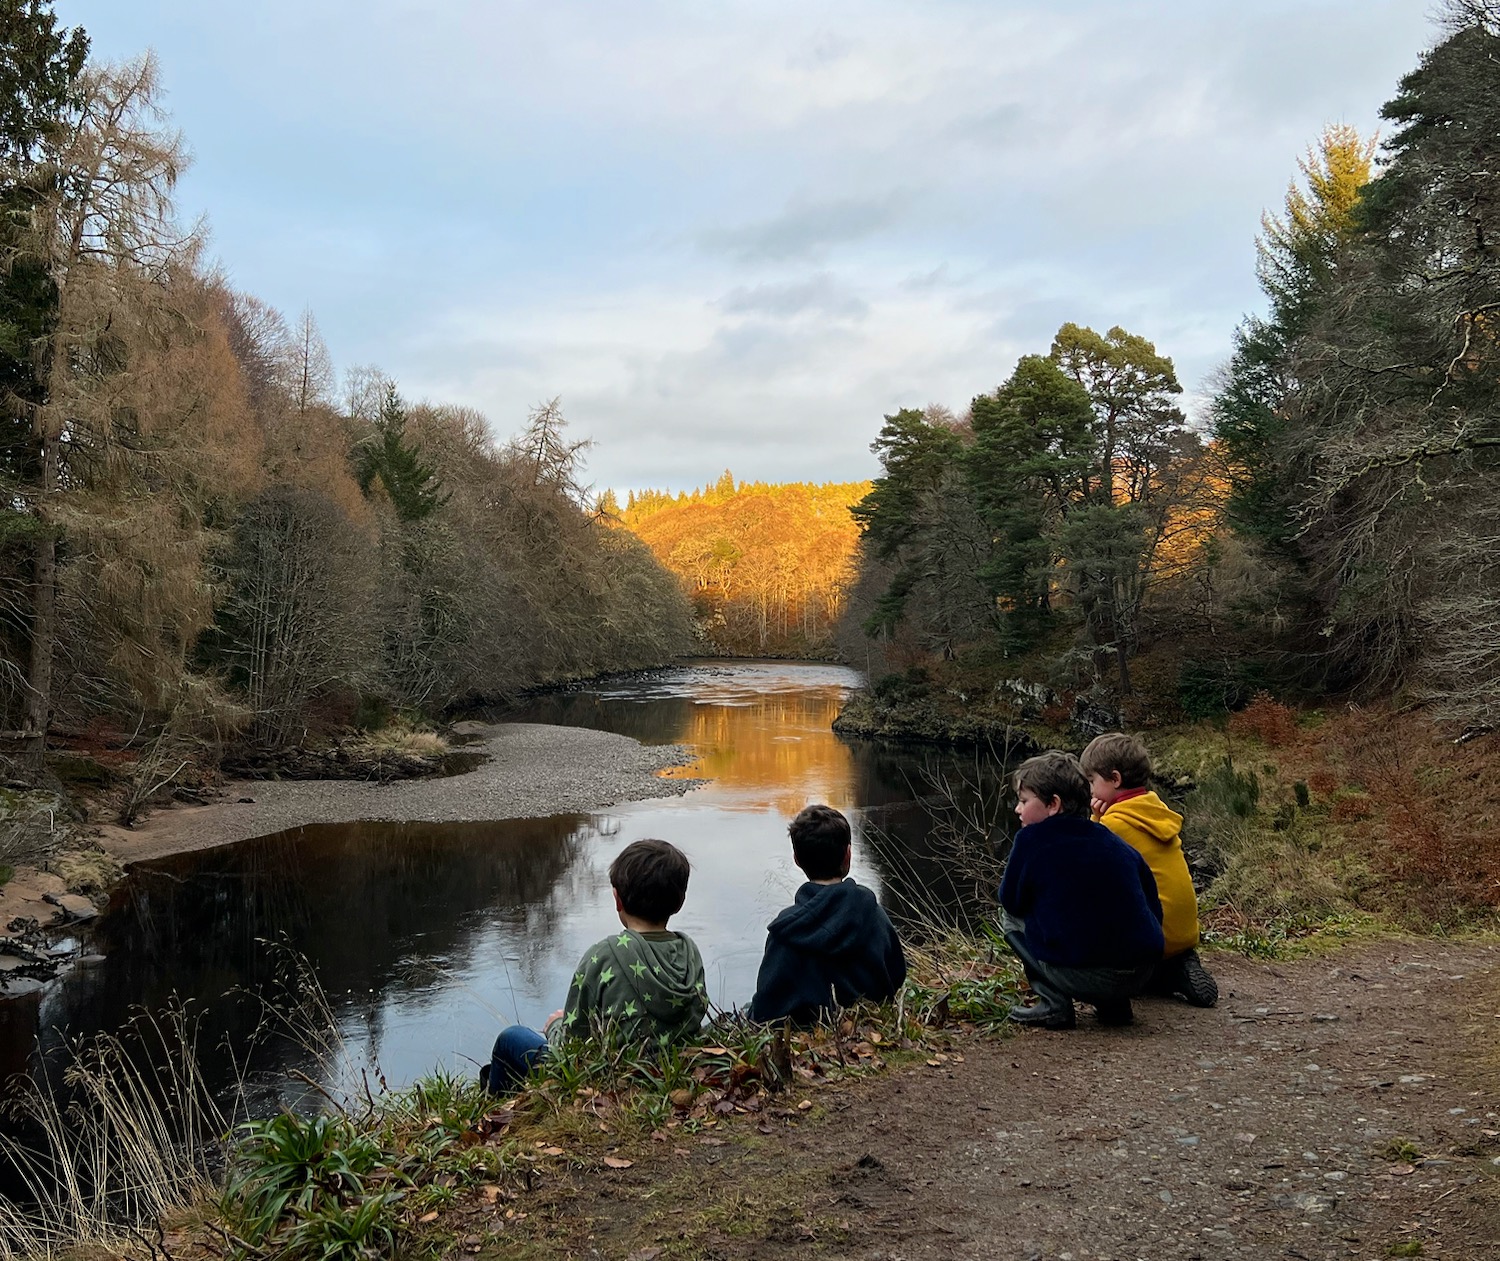 January walks along the River Findhorn from Logie Steading